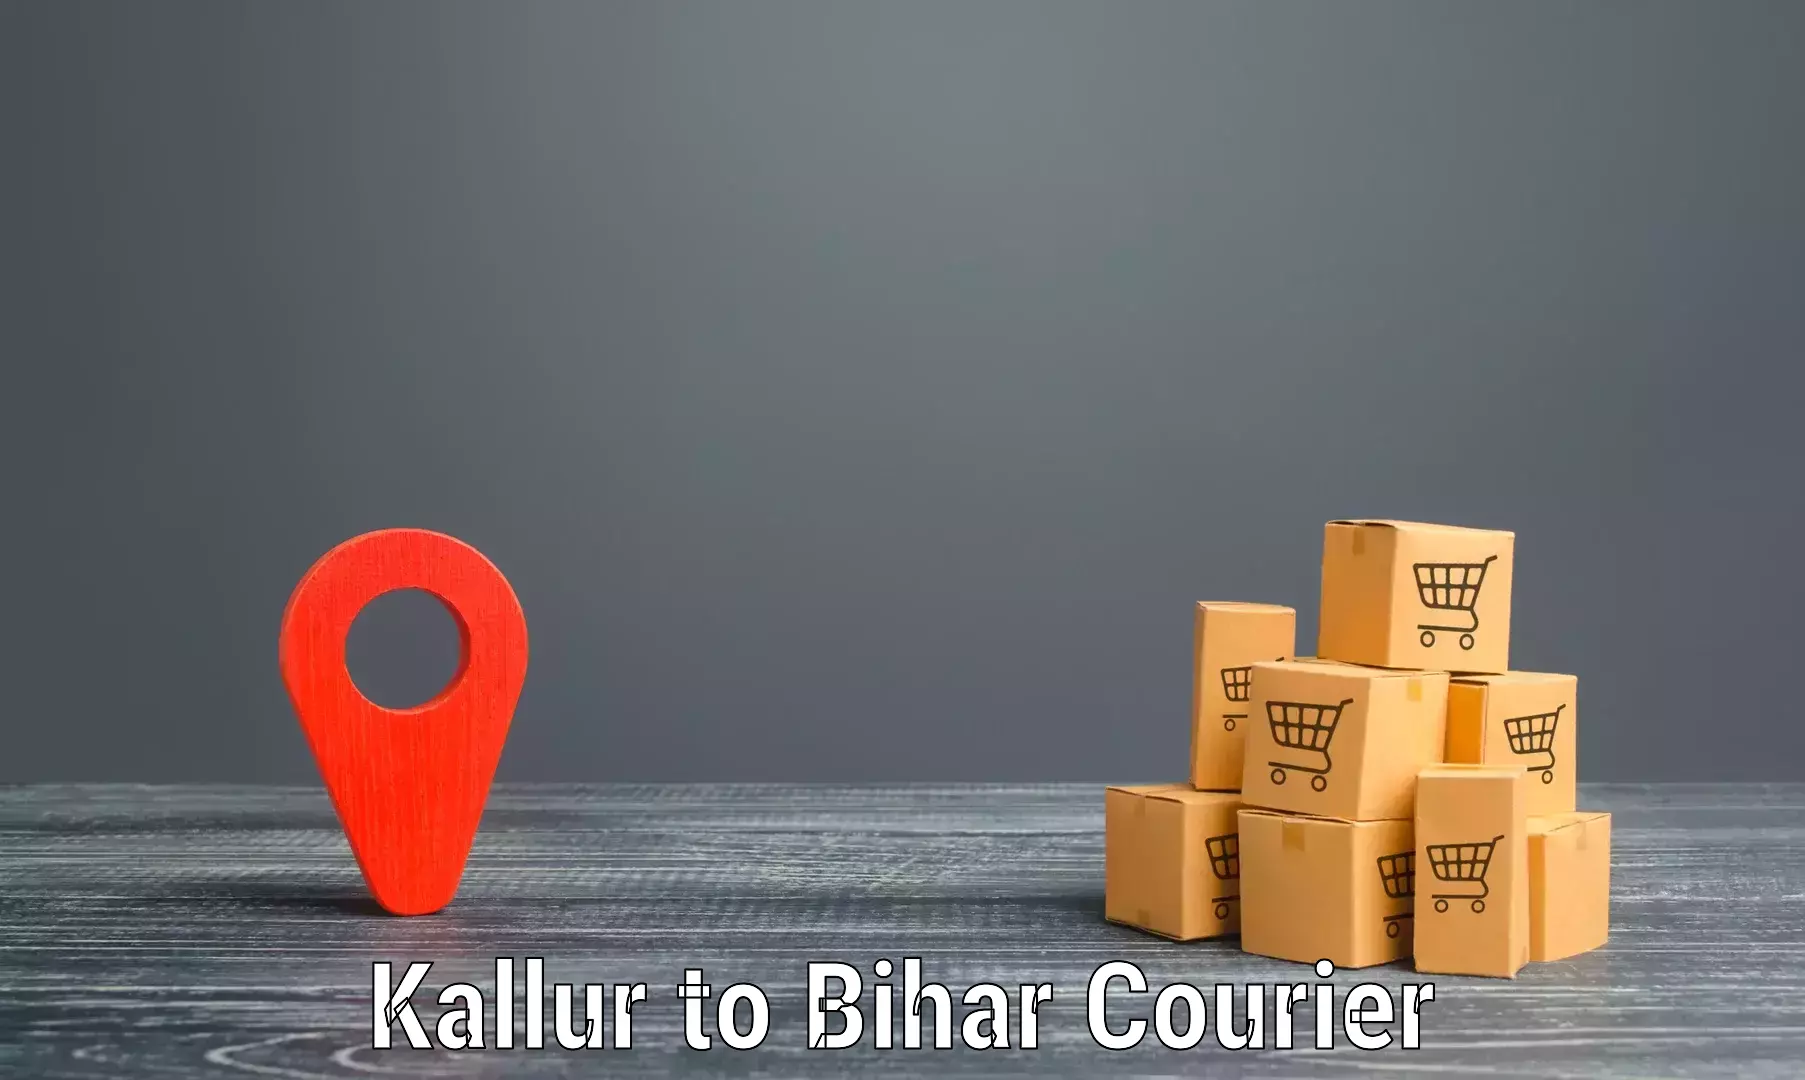 Full-service courier options in Kallur to Katoria